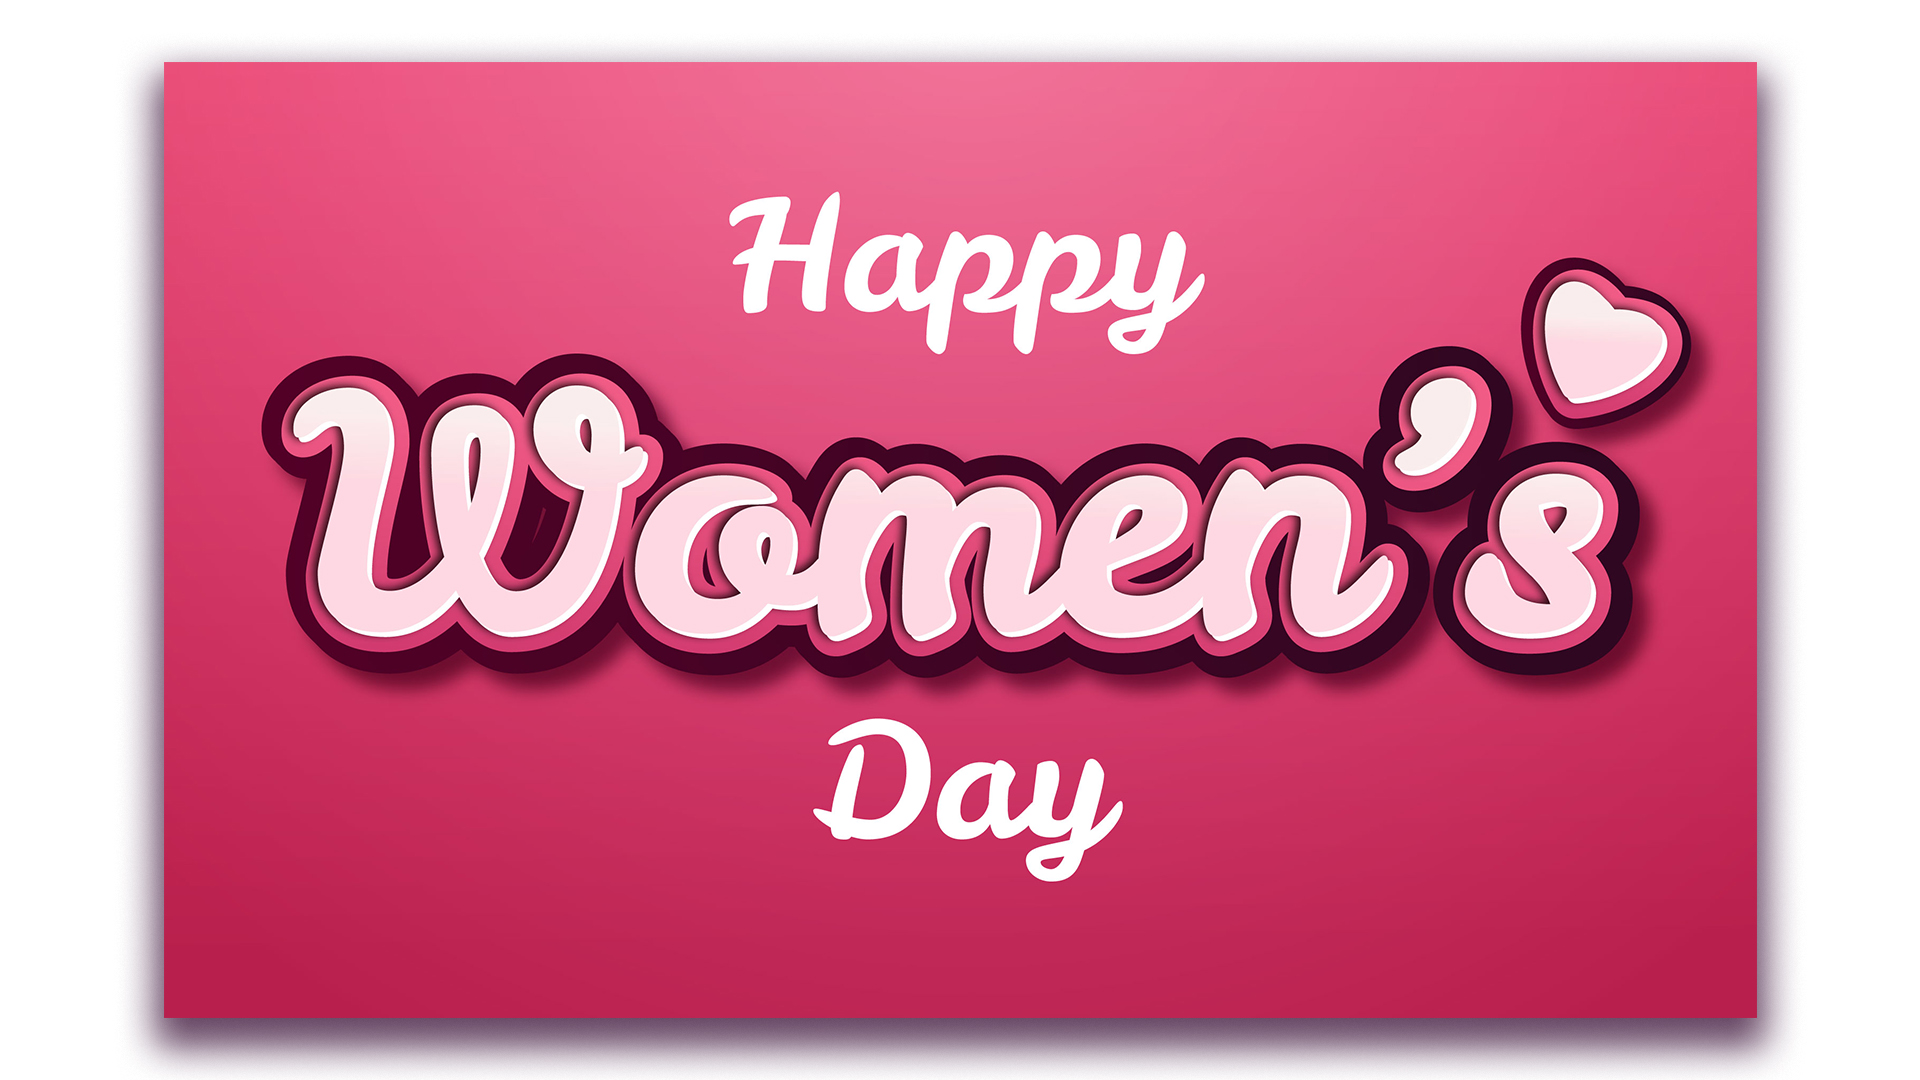 Happy women's day card with hearts.